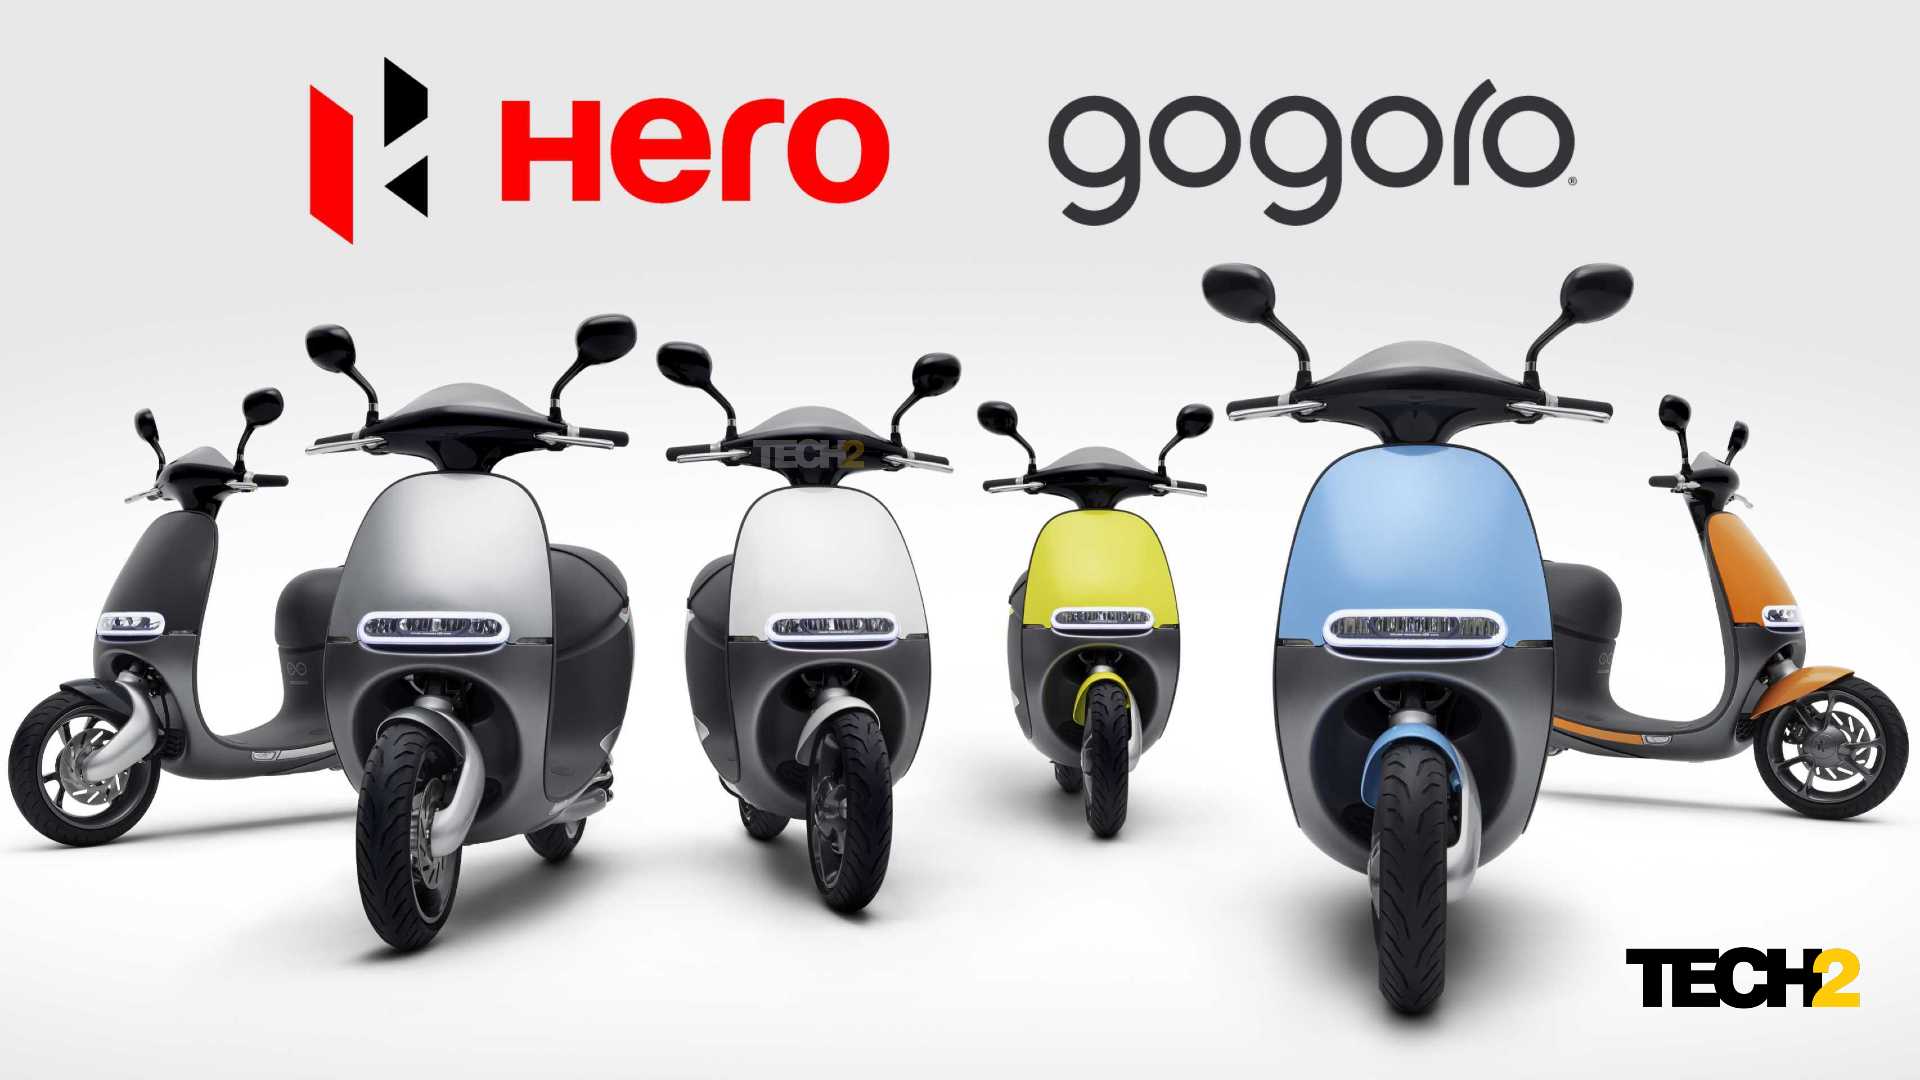 Soon, Hero MotoCorp will launch its own electric two-wheelers based on existing Gogoro models. Image: Gogoro/Tech2